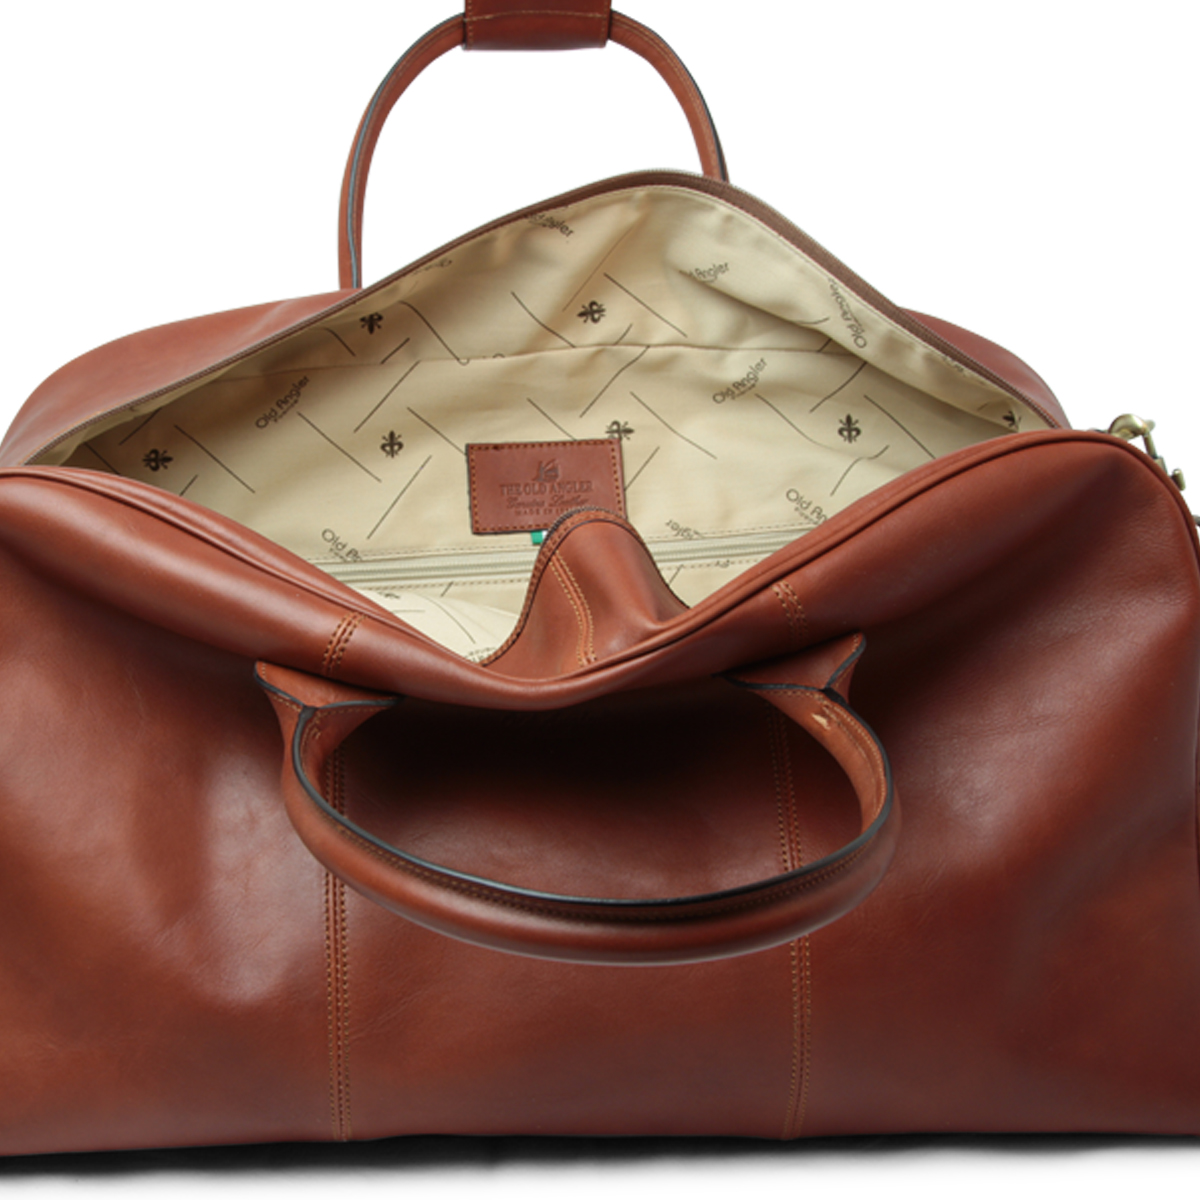 All in one leather bag - brown|403991MA|Old Angler Firenze